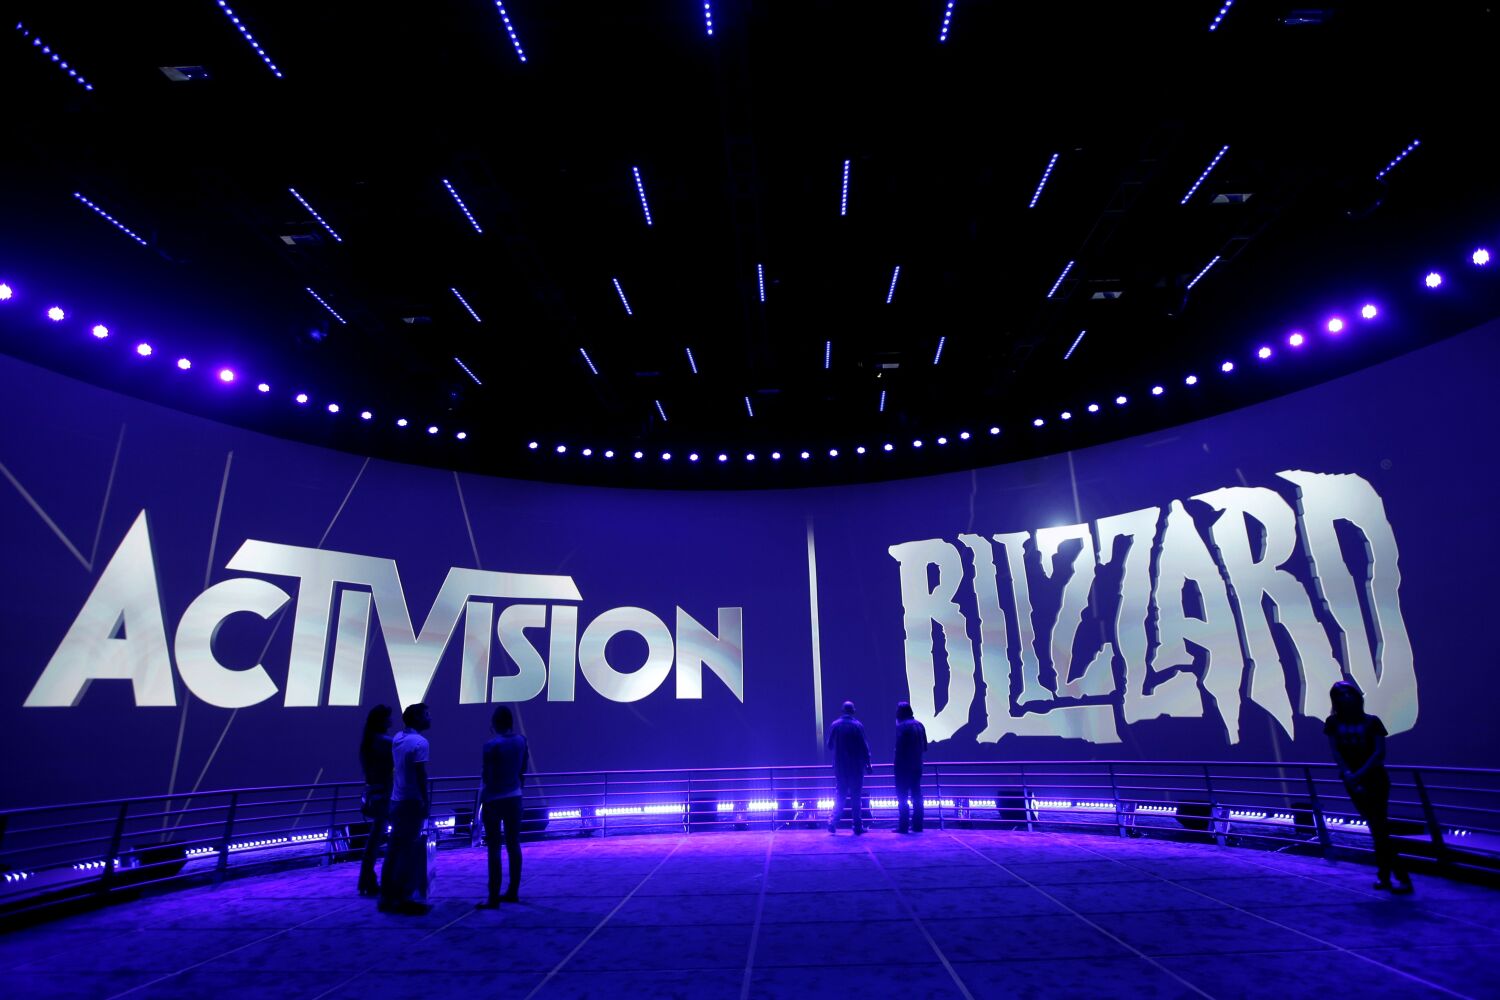 Activision Blizzard to pay $35 million to settle SEC charges on workplace disclosures